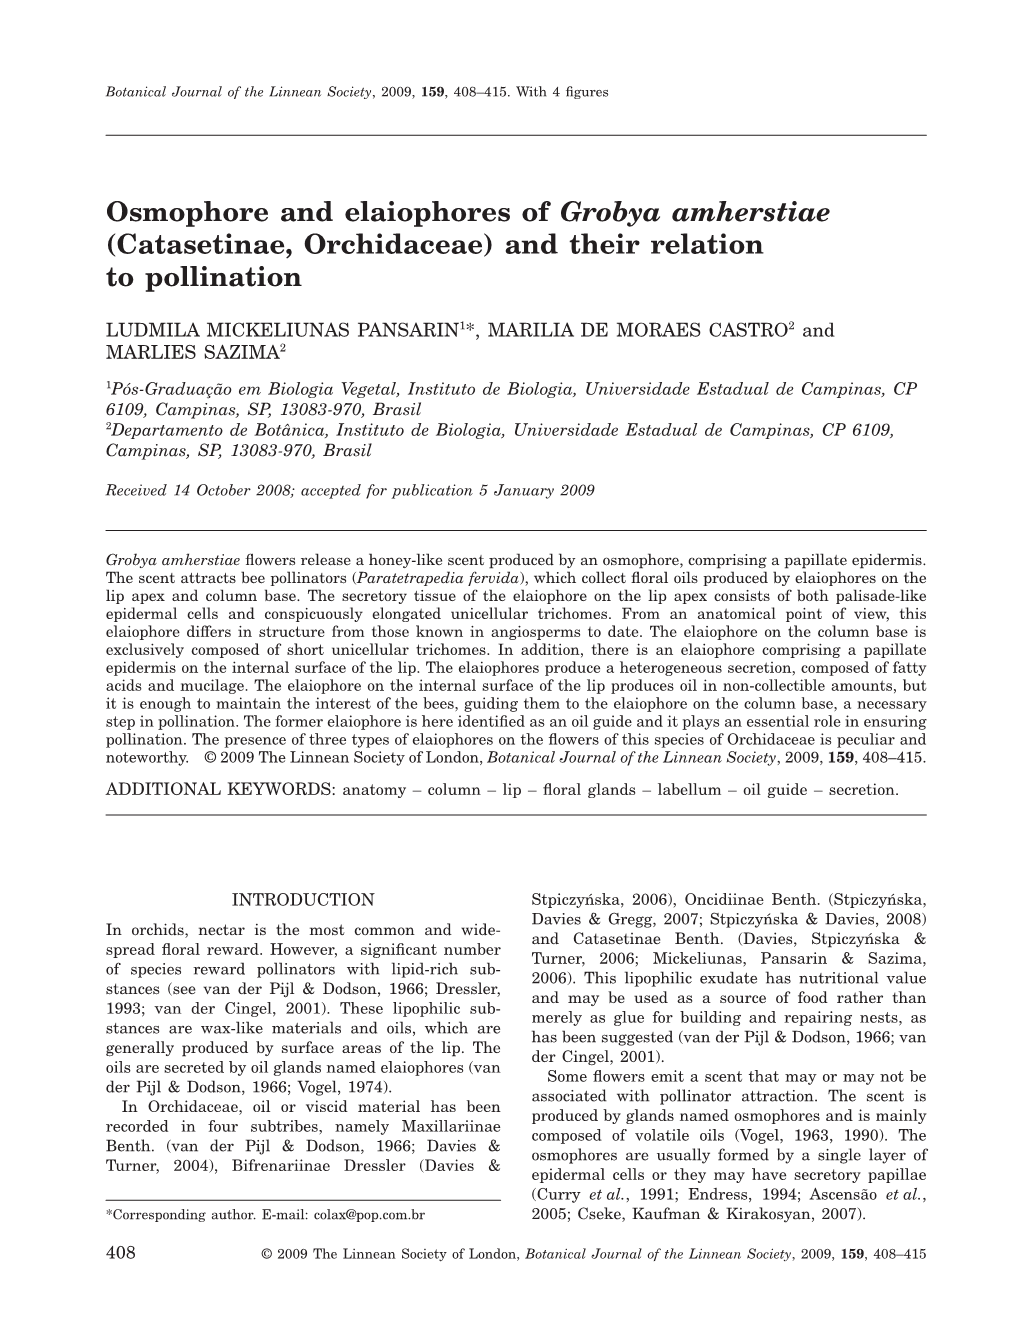 Osmophore and Elaiophores of Grobya Amherstiae (Catasetinae, Orchidaceae) and Their Relation to Pollination